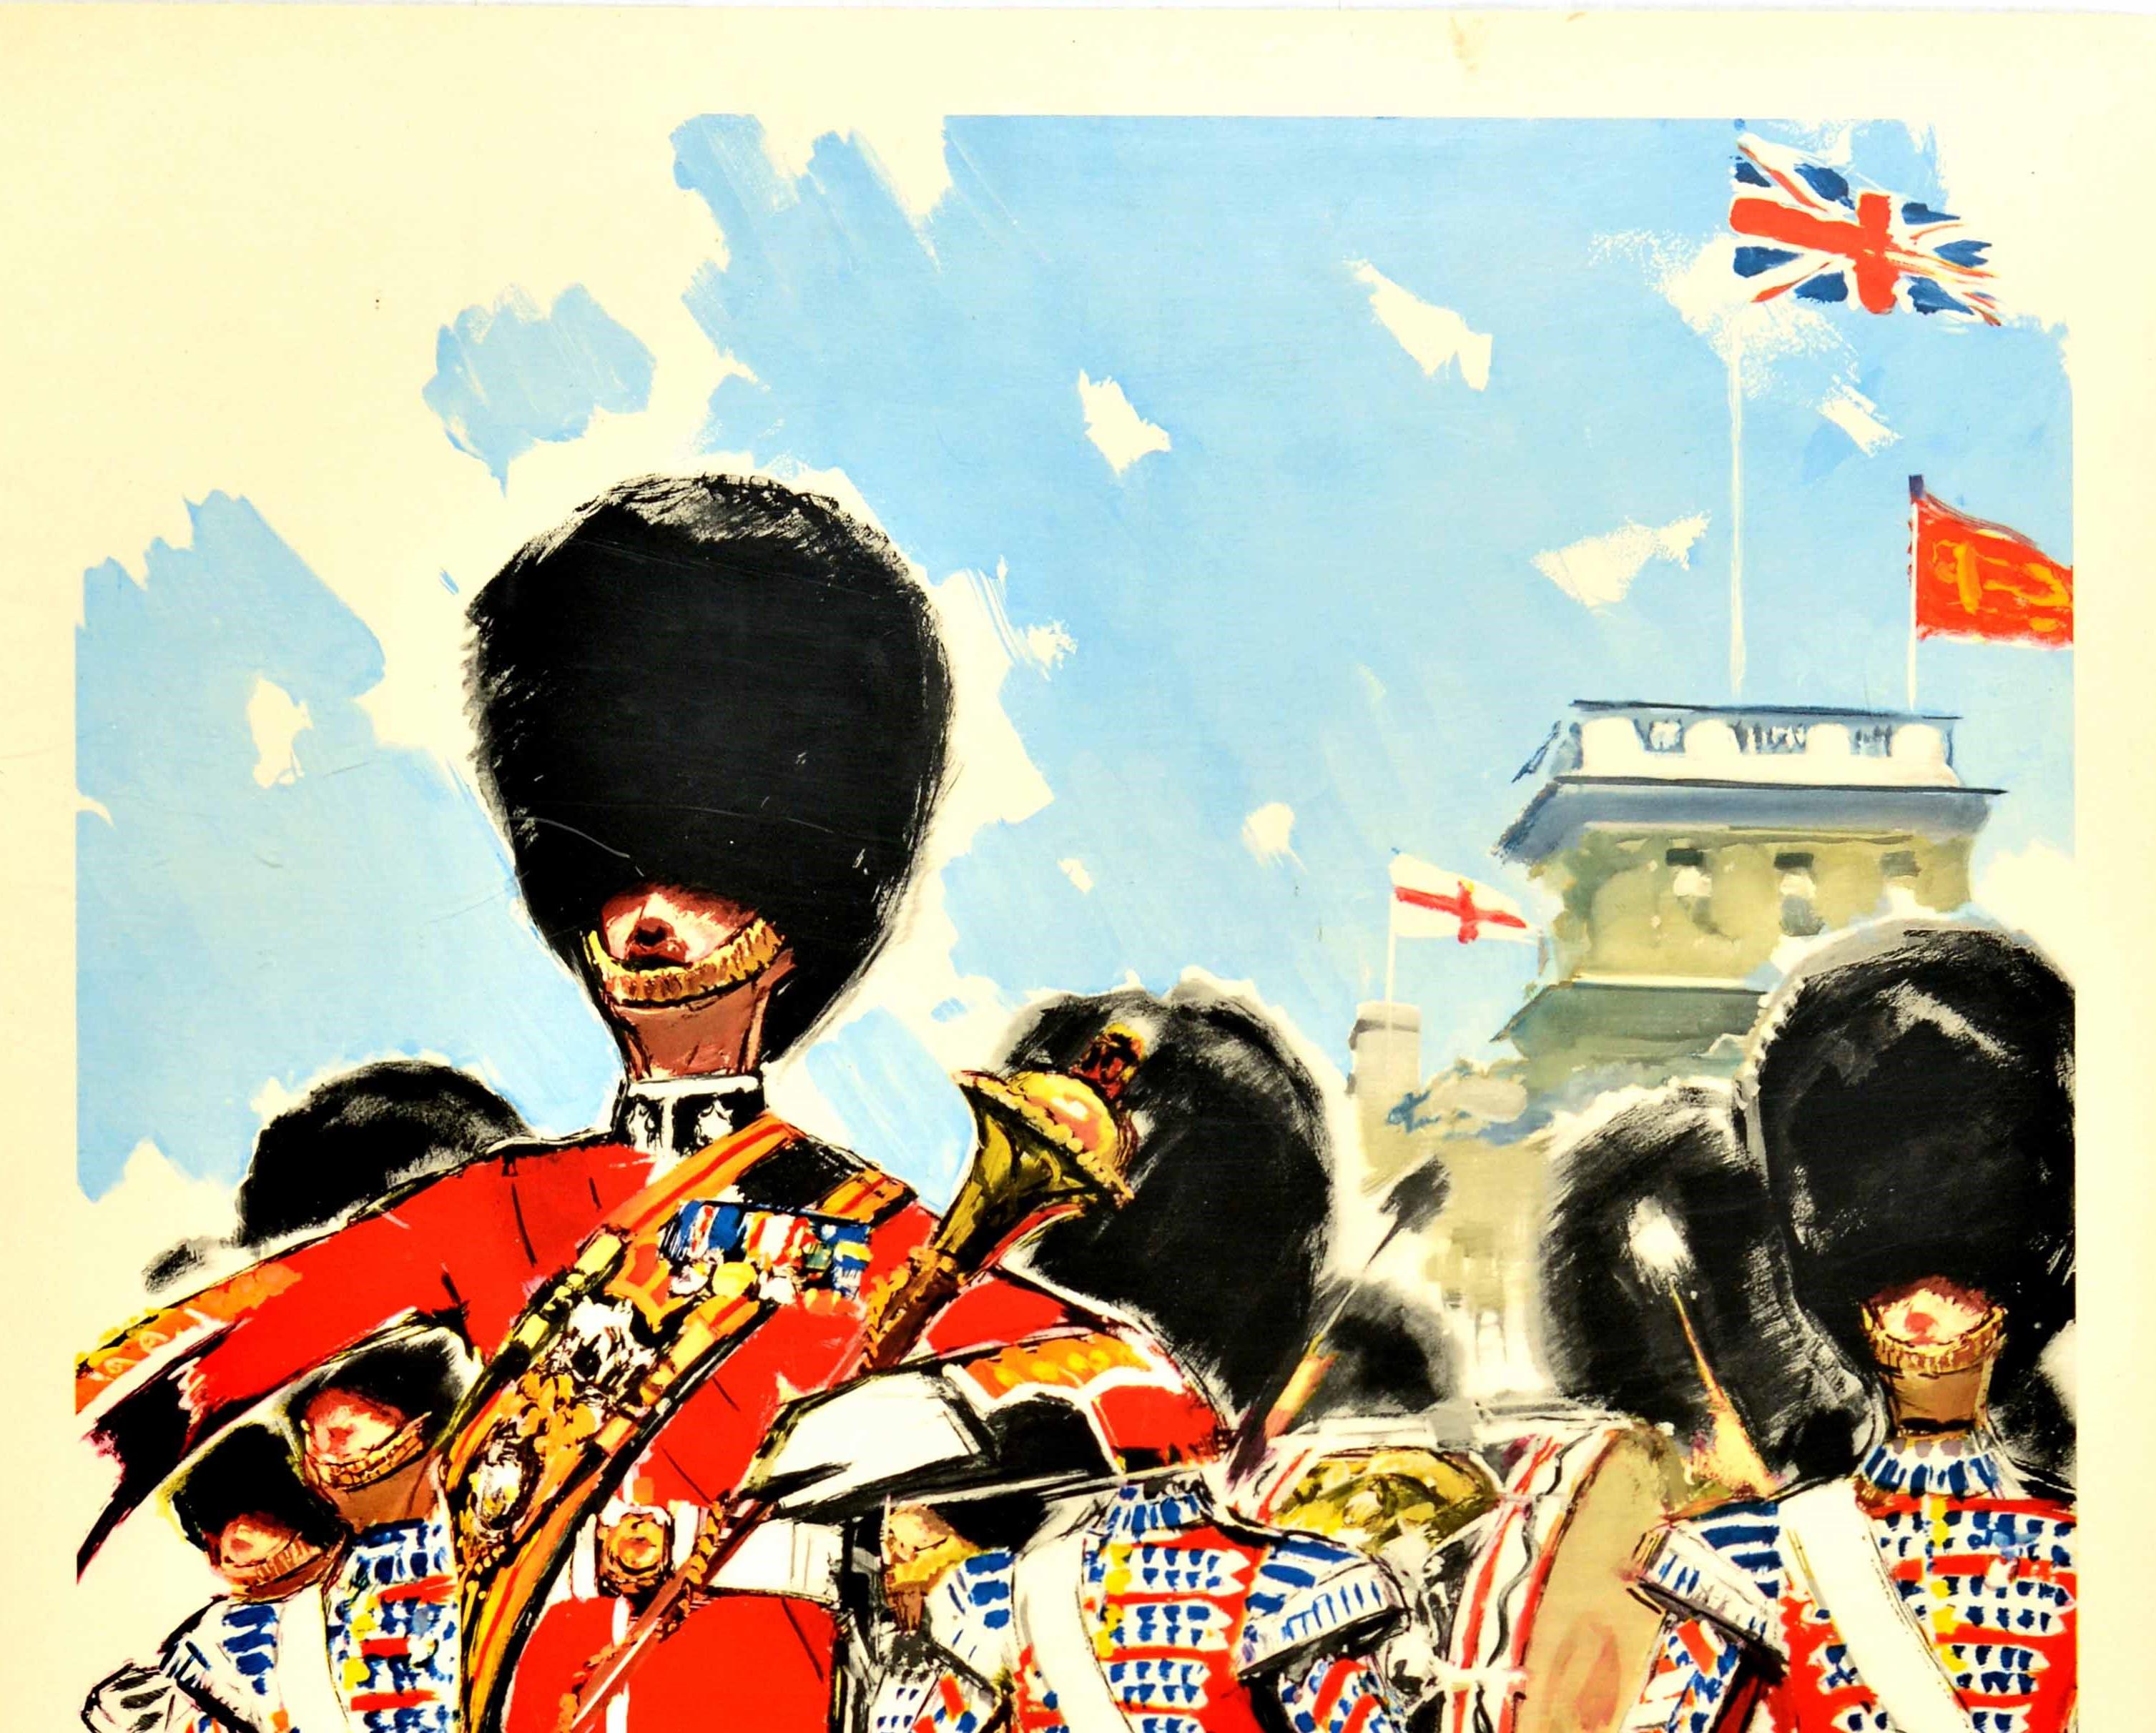 Original vintage travel poster for Britain featuring a colorful image of The Coldstream Guards in full uniform marching towards the viewer in a ceremonial parade playing music on drums in front of a building flying the Union Jack, Royal and English